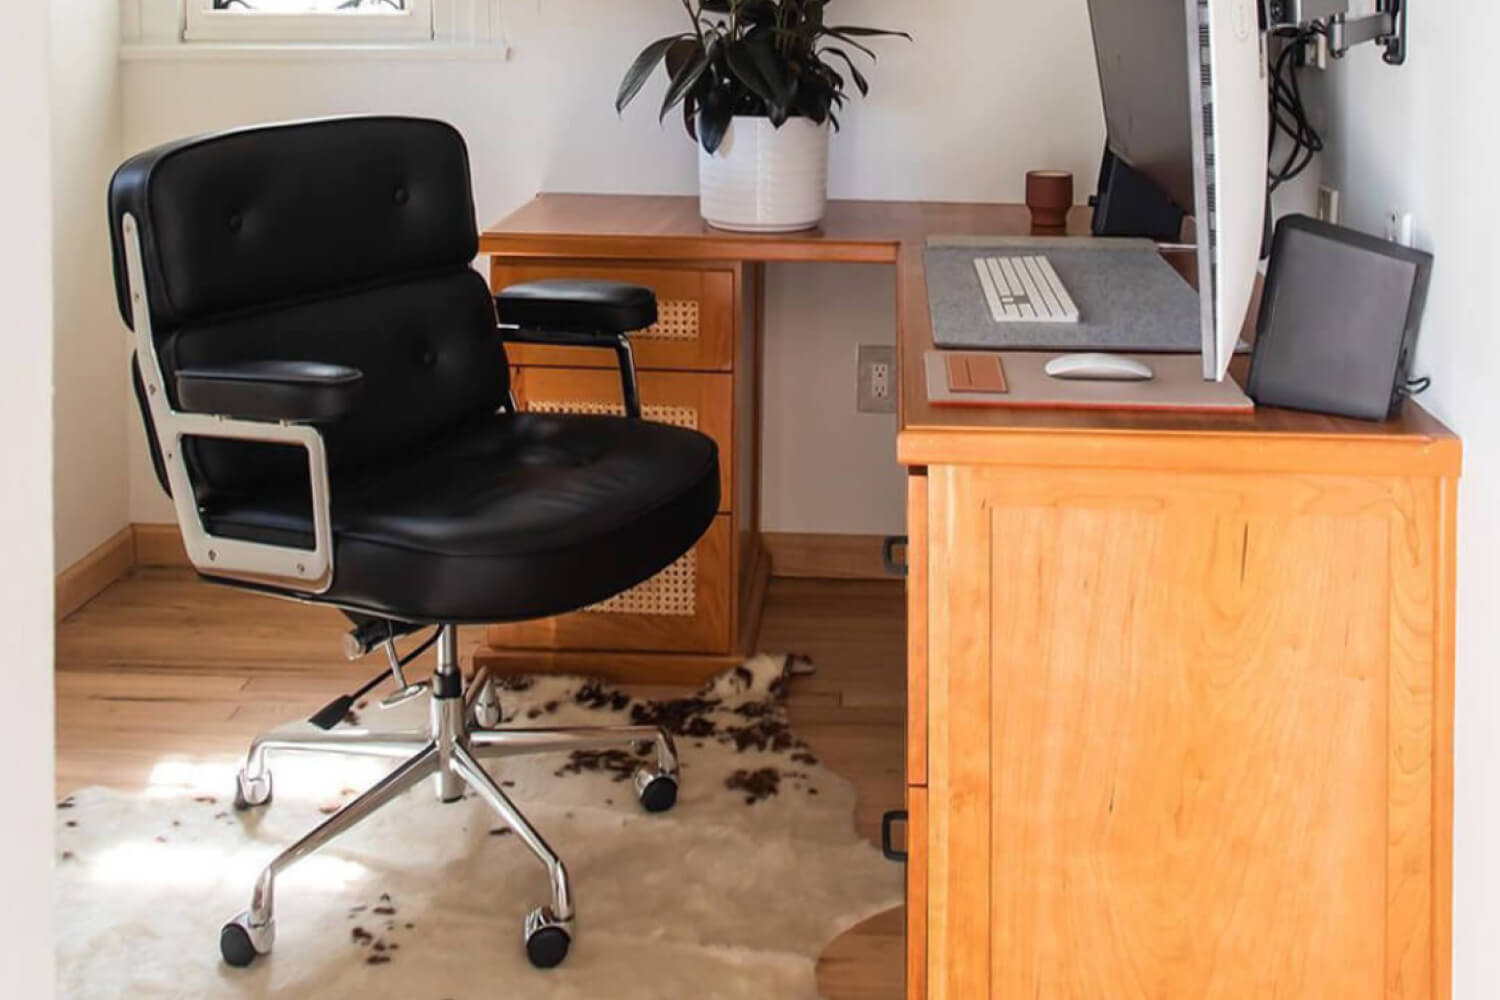 A modern Executive Chair with black upholstery and silver metal accents, positioned at a wooden desk with a computer setup, tablet, and a potted plant within a bright home office space.